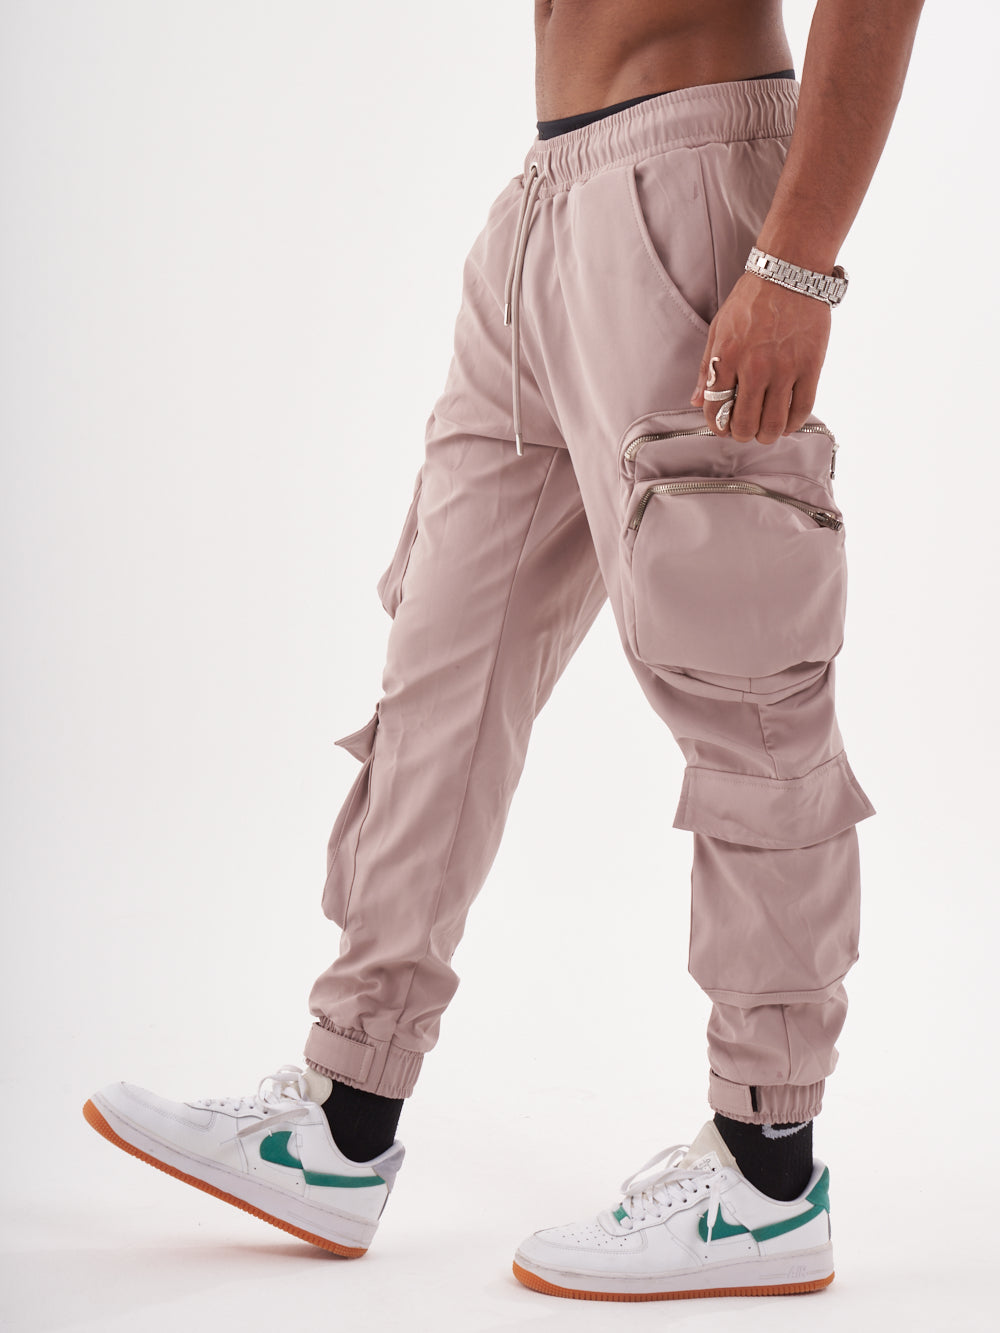 A man wearing SPUNK JOGGERS | MAUVE and sneakers.